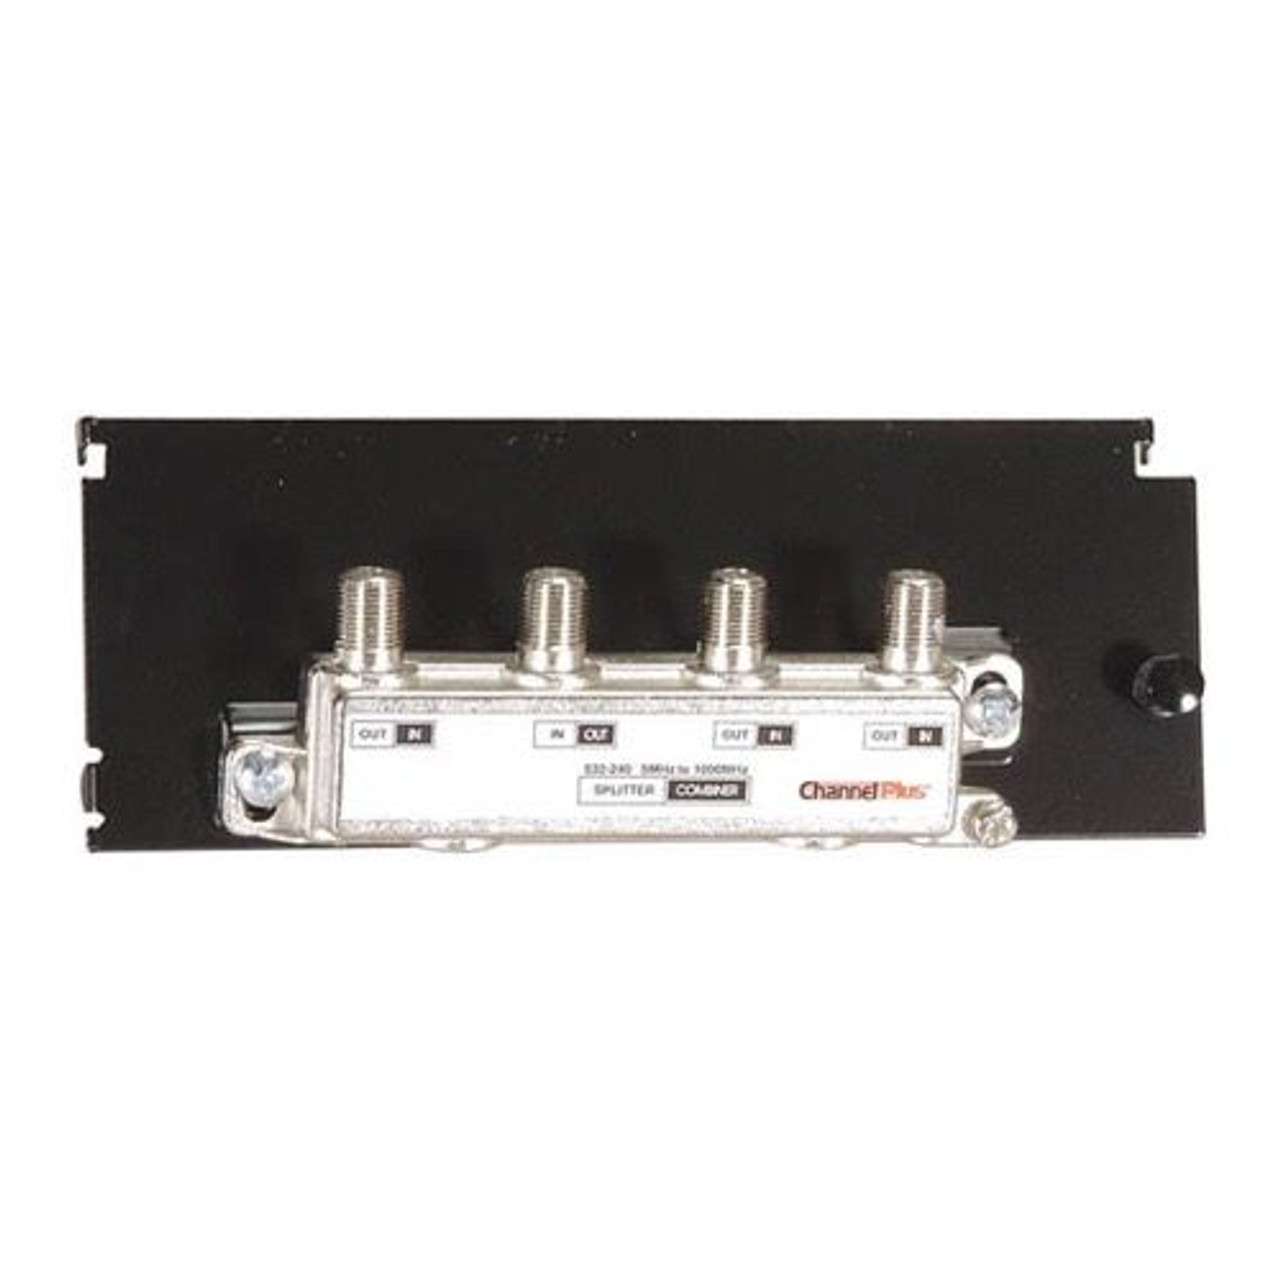 Open House H803 3-Way Splitter / Combiner Hub CATV Antenna HDTV Grid Mounted Distribution Hub, Distributes Signals to 3 Locations with its High Quality On-Board Splitter, Part # H-803